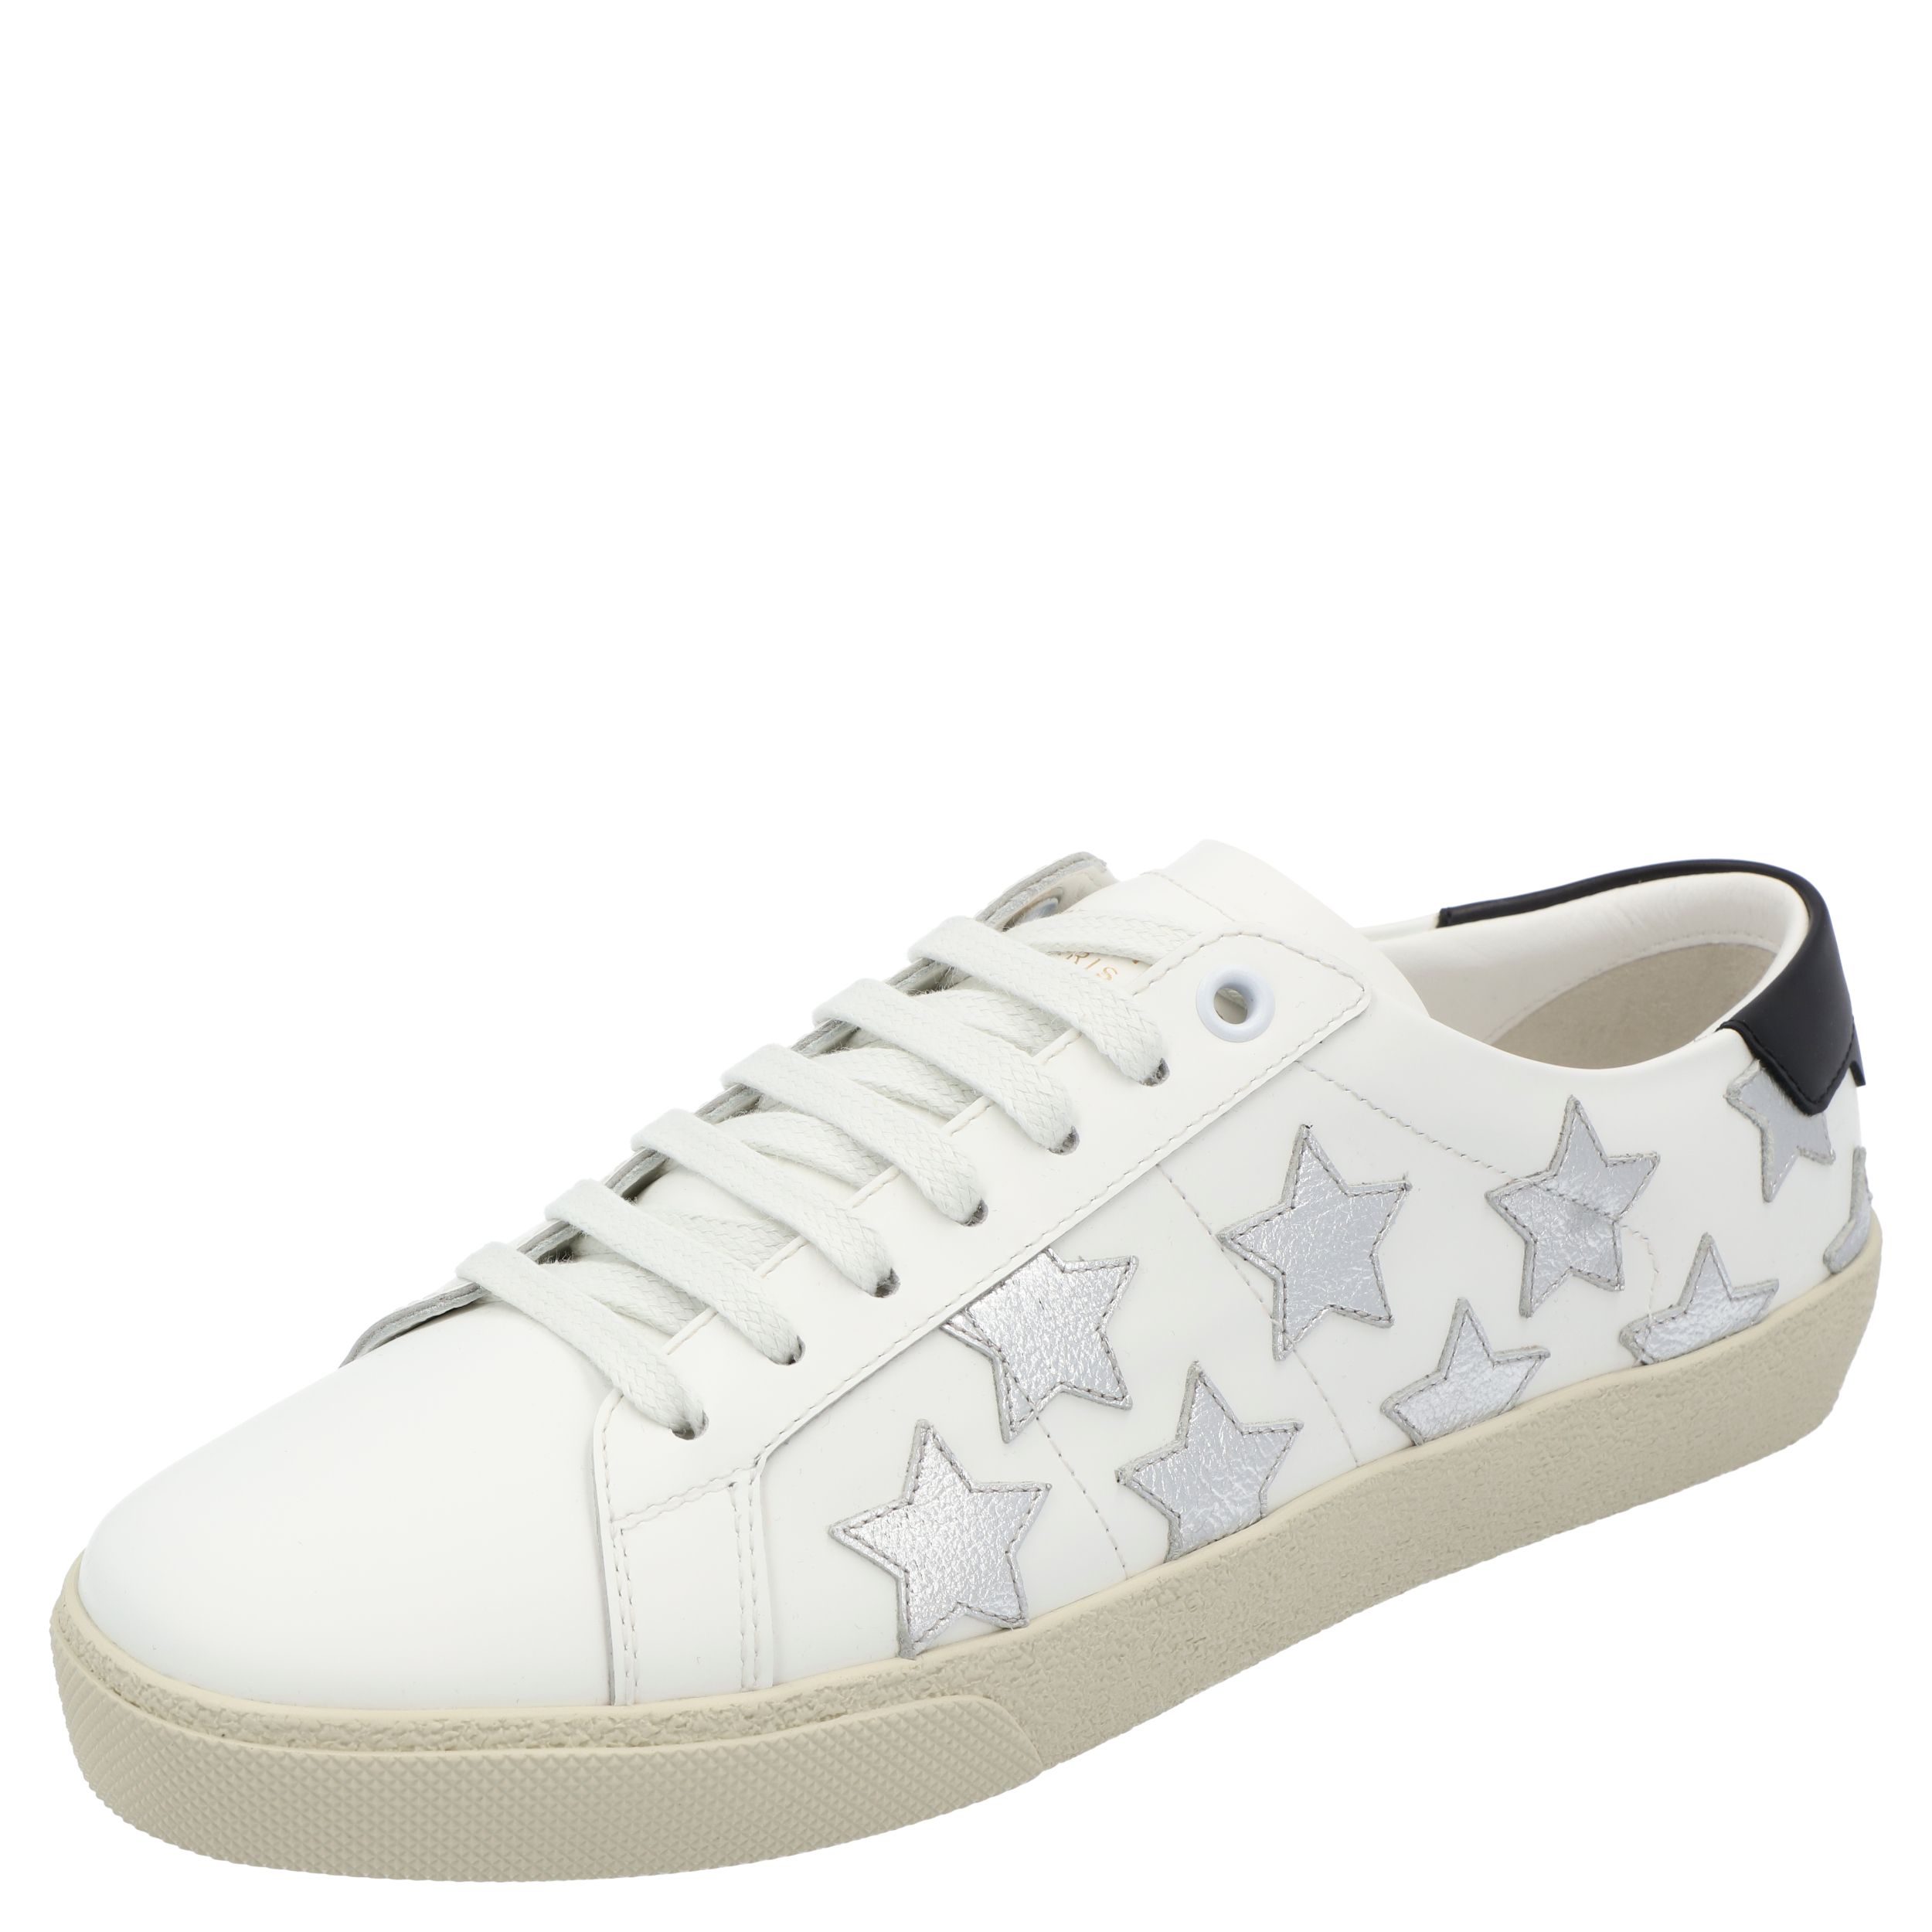 Pre-owned Saint Laurent White Leather Court Classic Sl/06 California Sneakers Size Eu 37.5